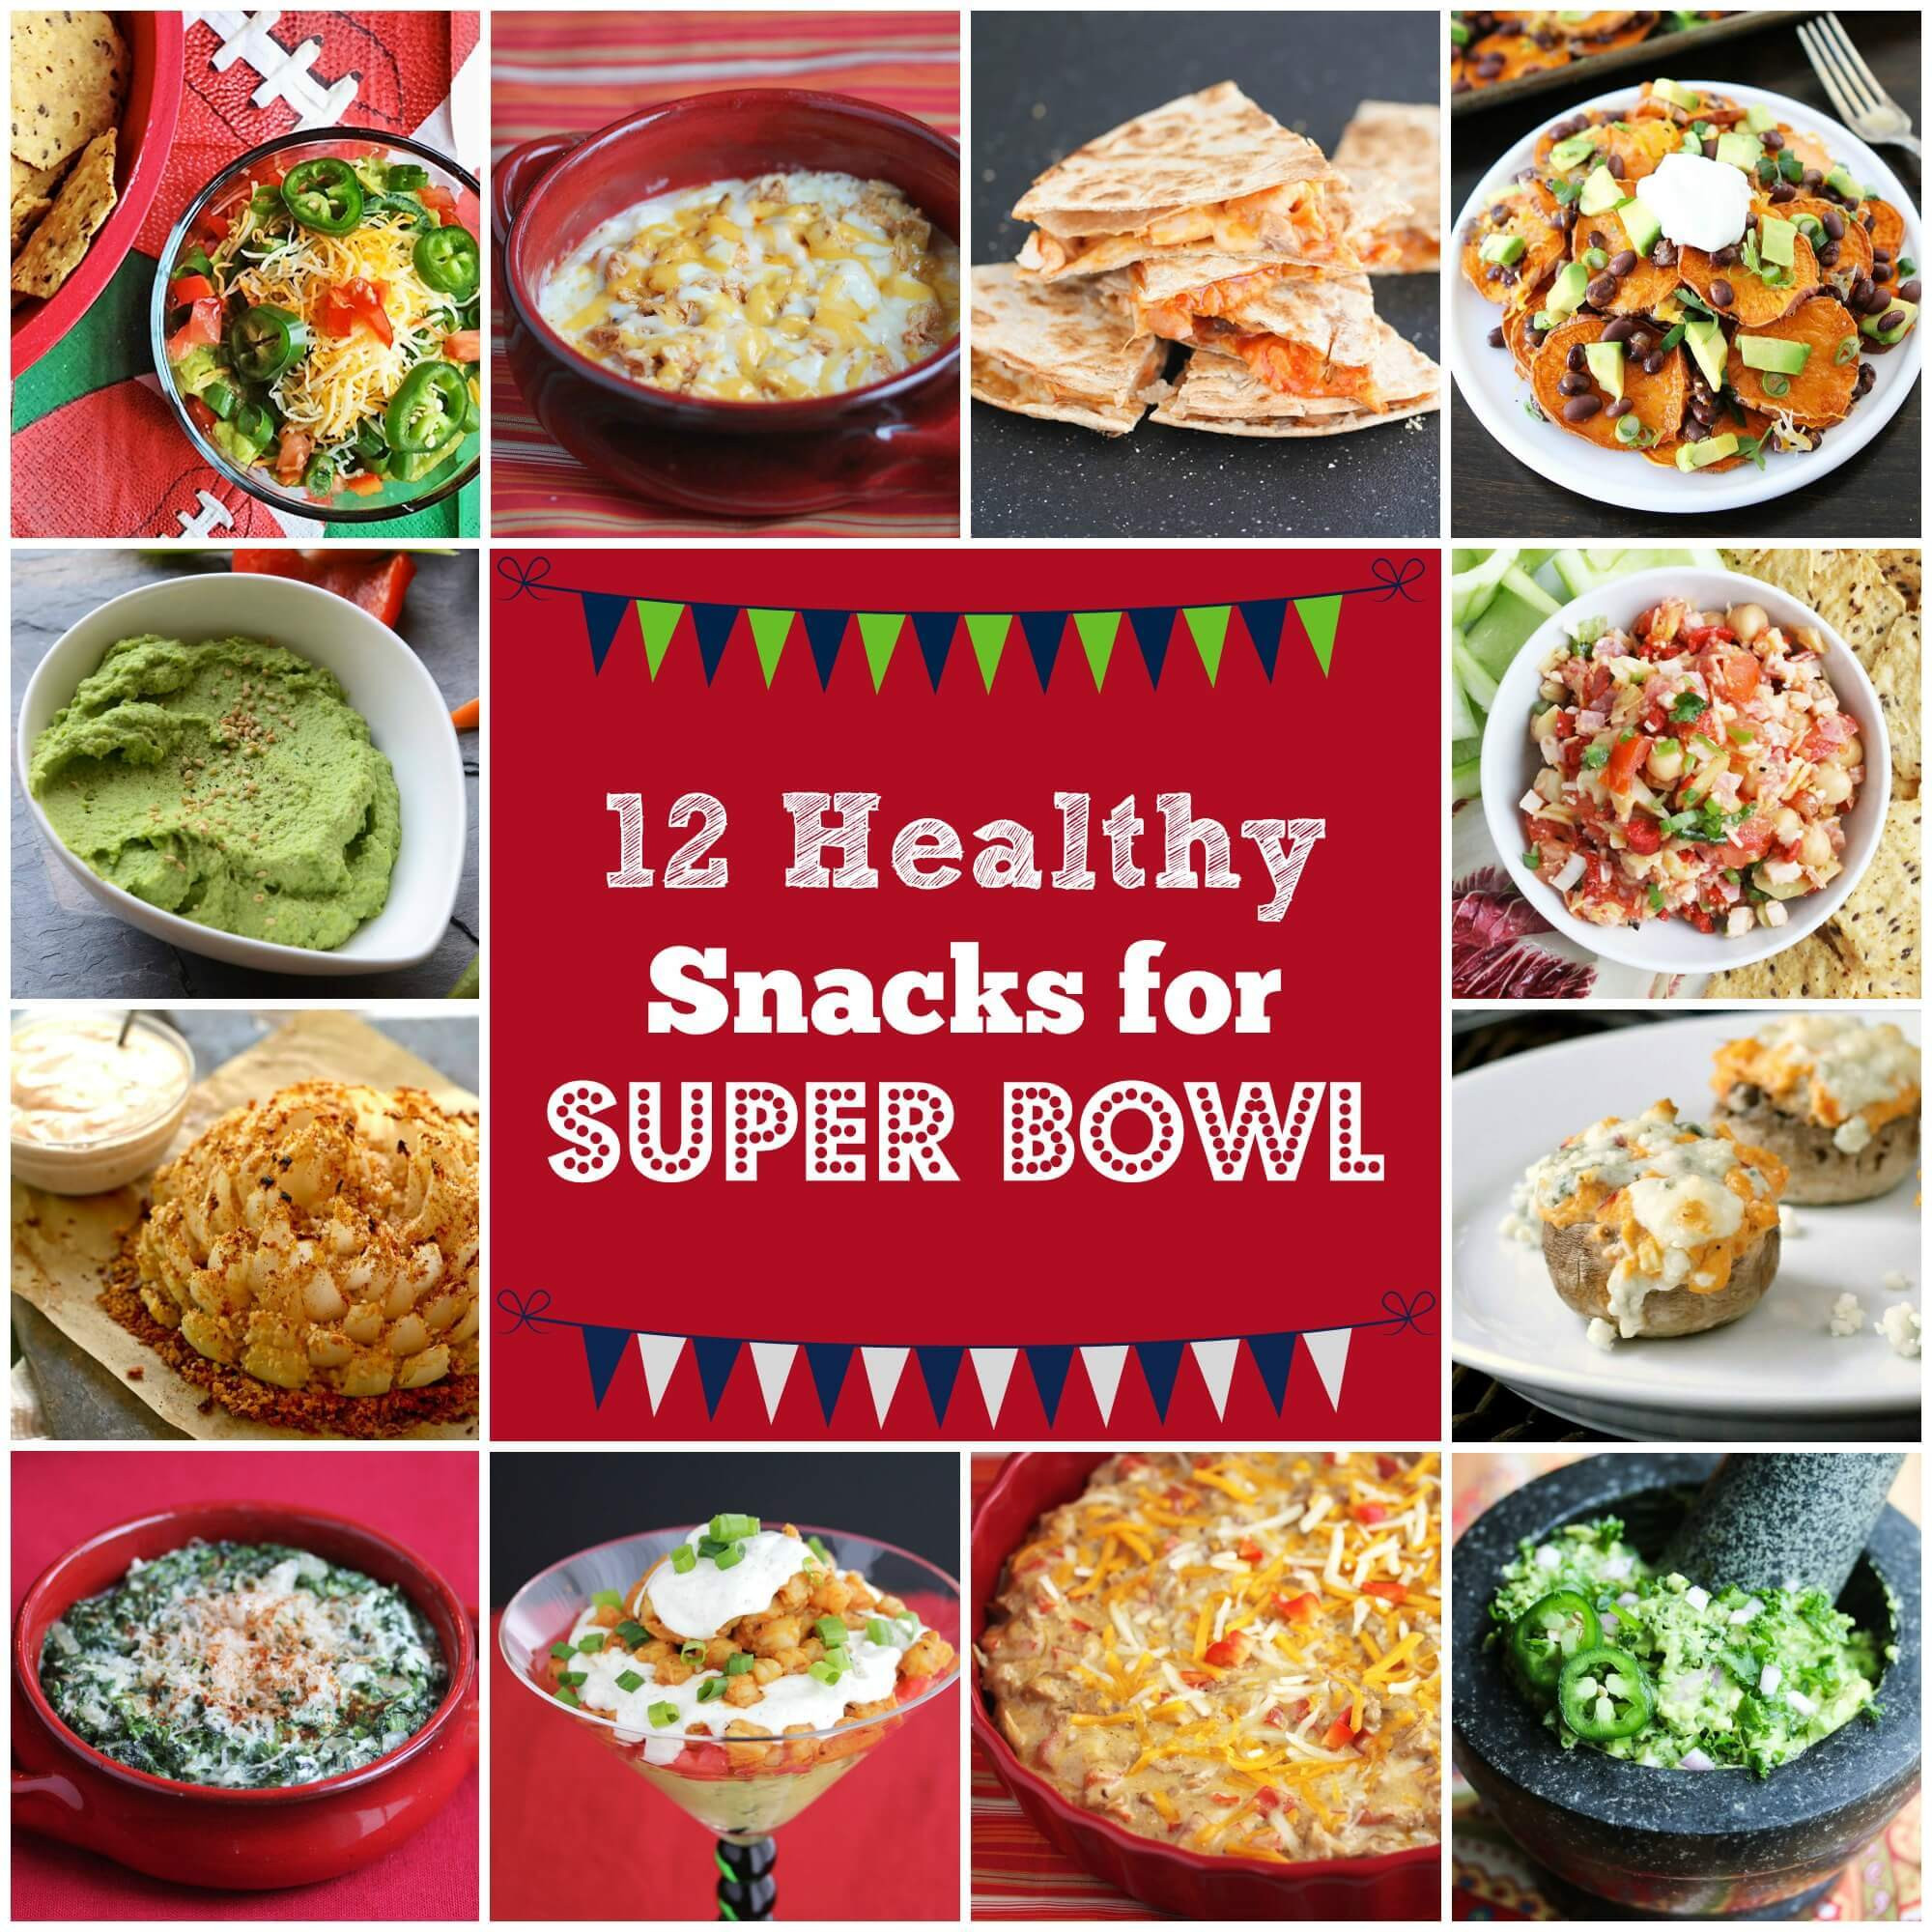 Super Bowl Munchies Recipes
 12 Healthy Super Bowl Snack Recipes Jeanette s Healthy